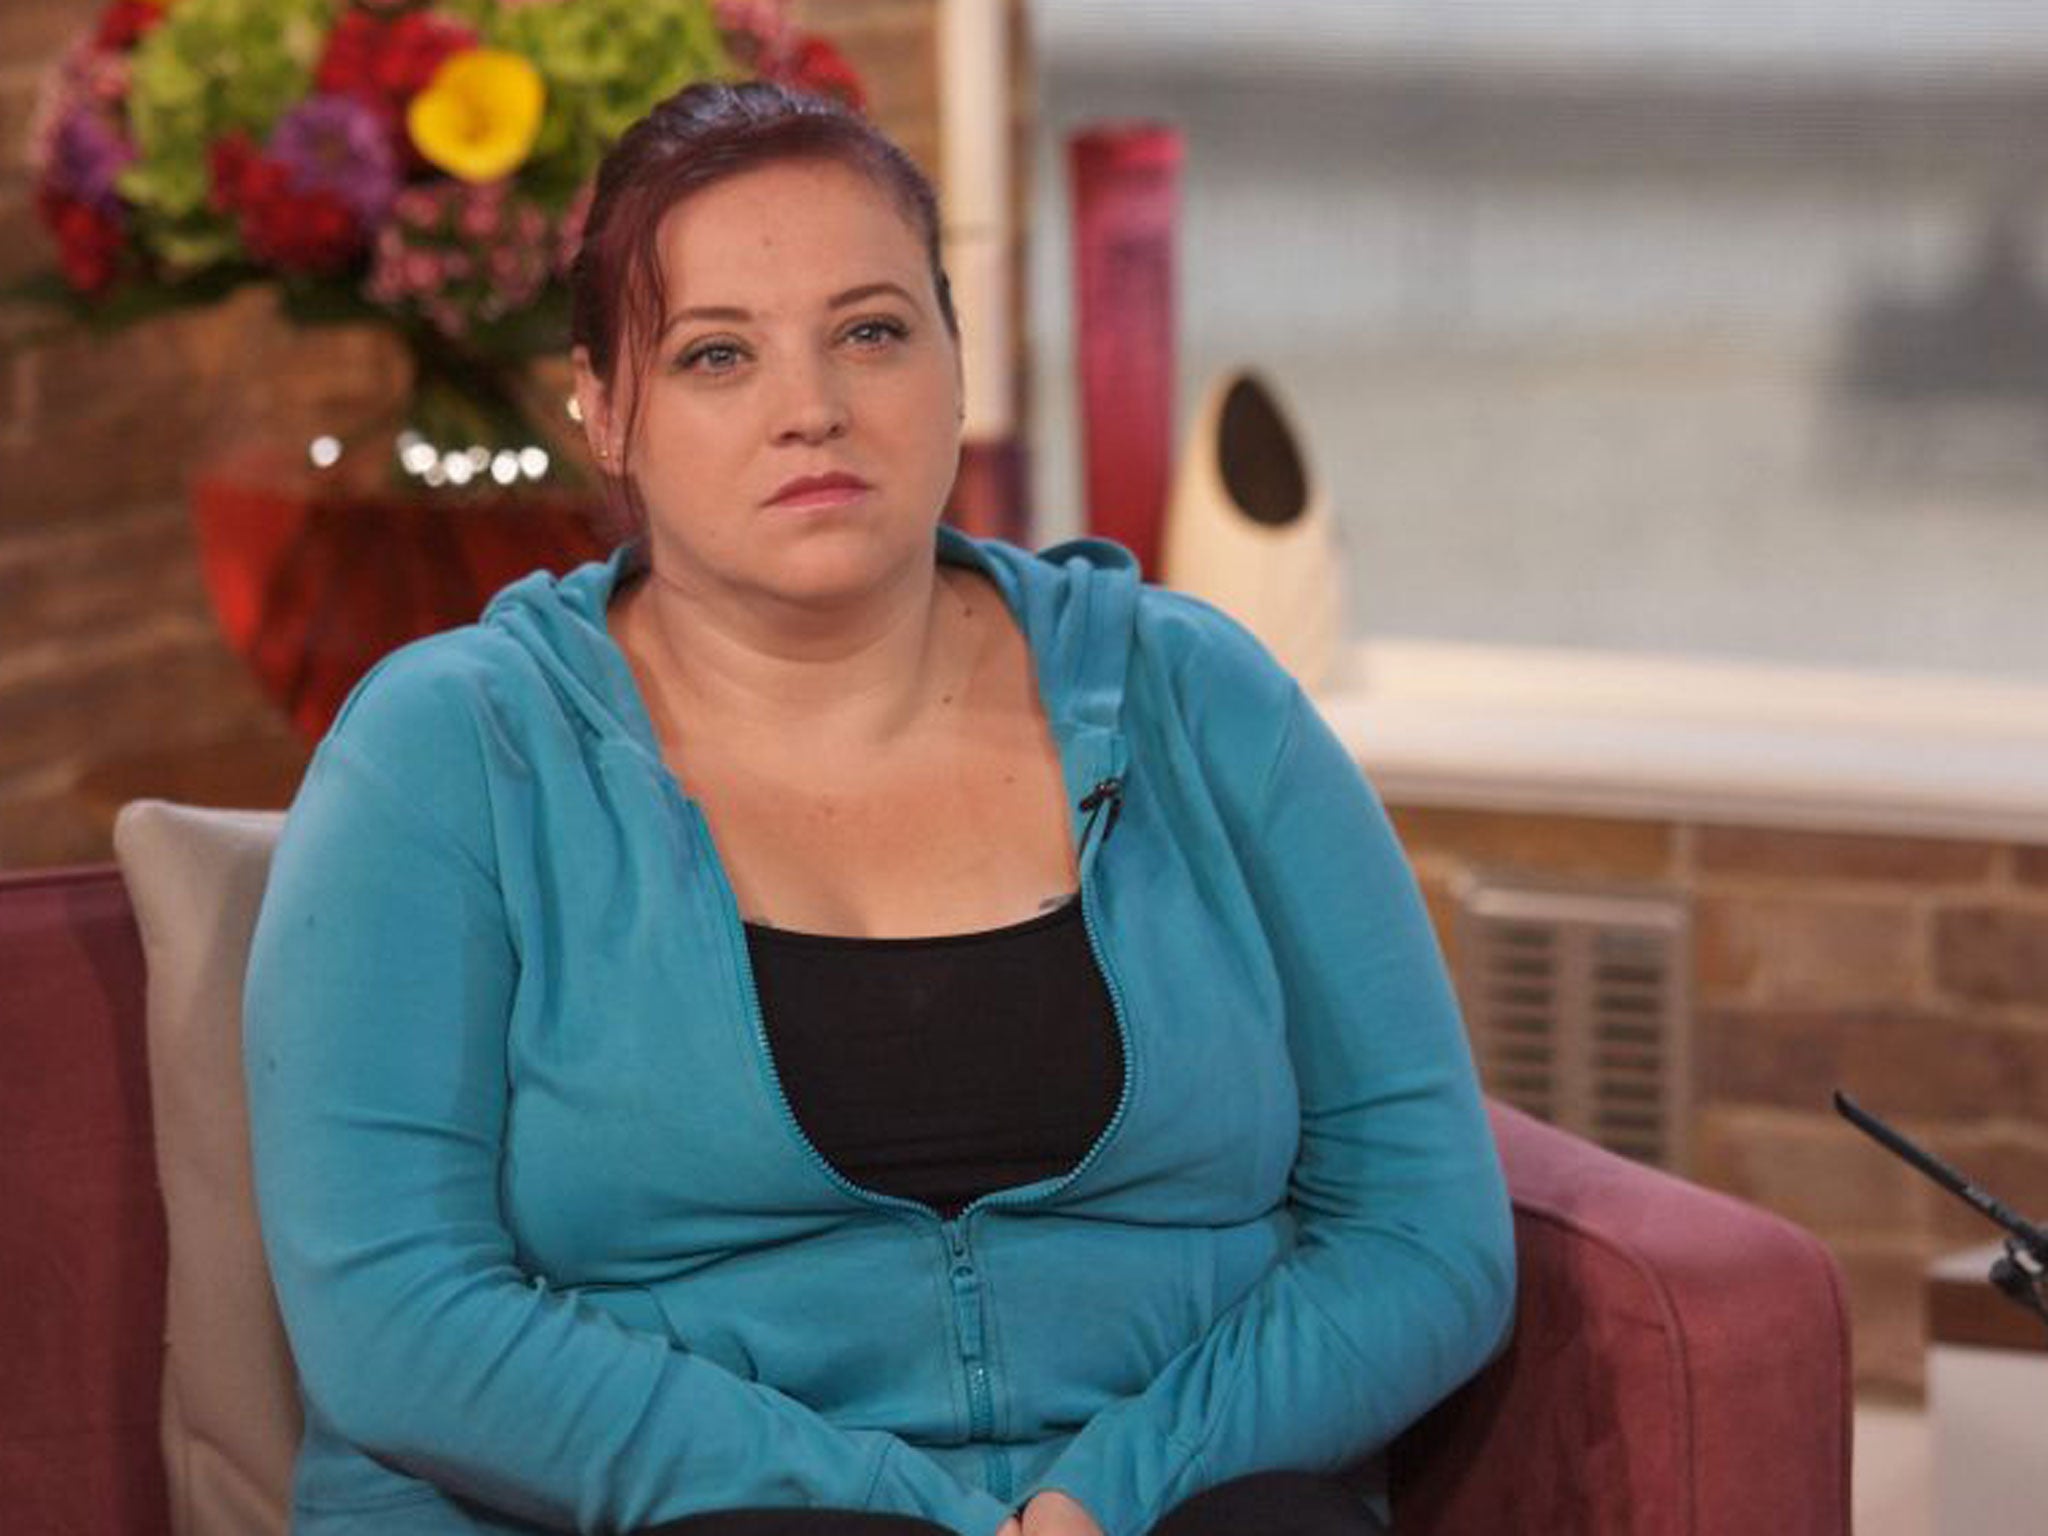 Moira Pearce, left, appeared on the ‘This Morning’ TV show in 2011 to say her weekly benefit of £600 a week was not enough for her family of 10 children